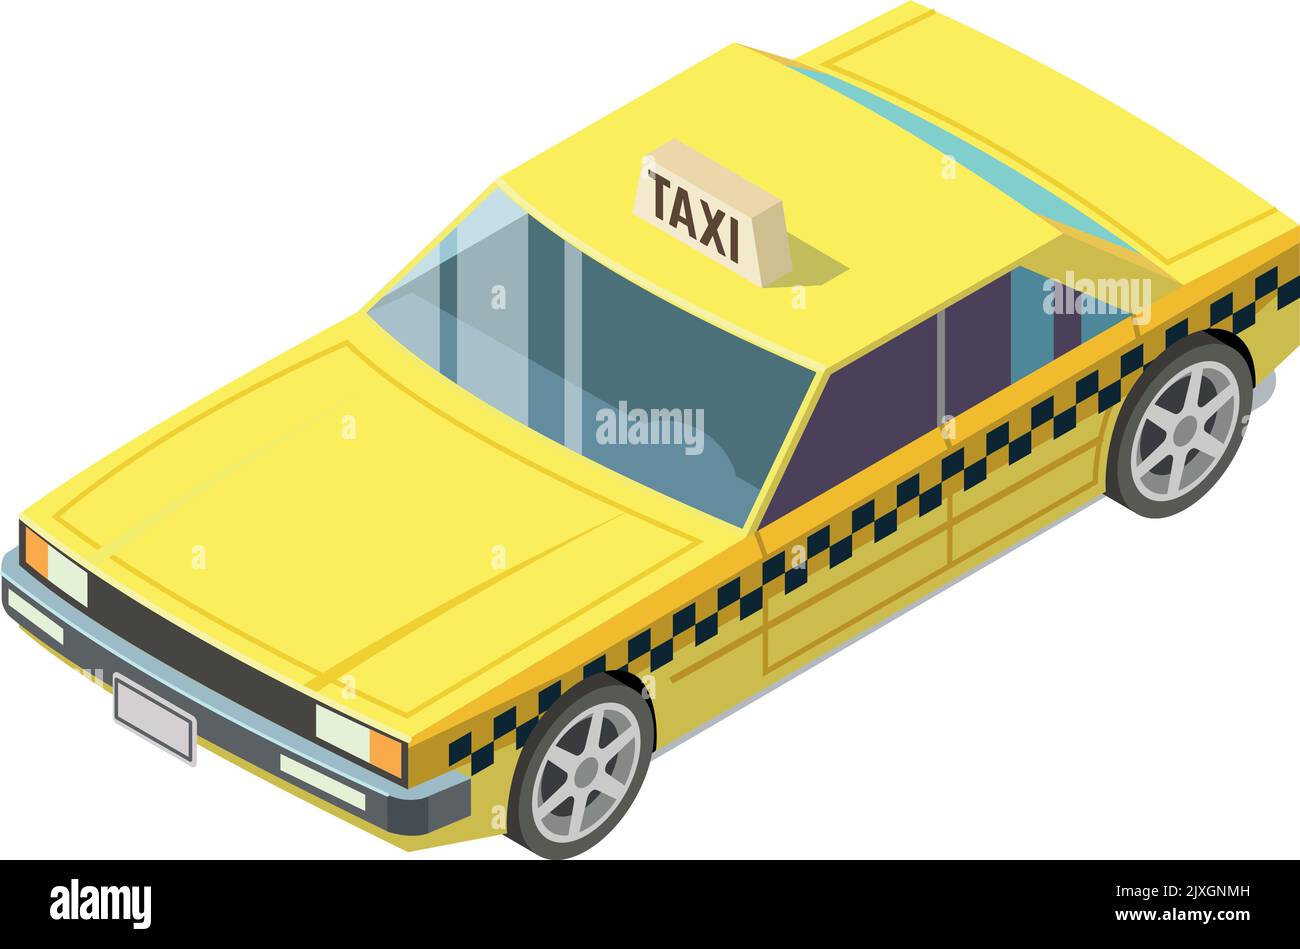 Isometrisches Frontsymbol des Taxiwagens. City-Taxi Stock Vektor